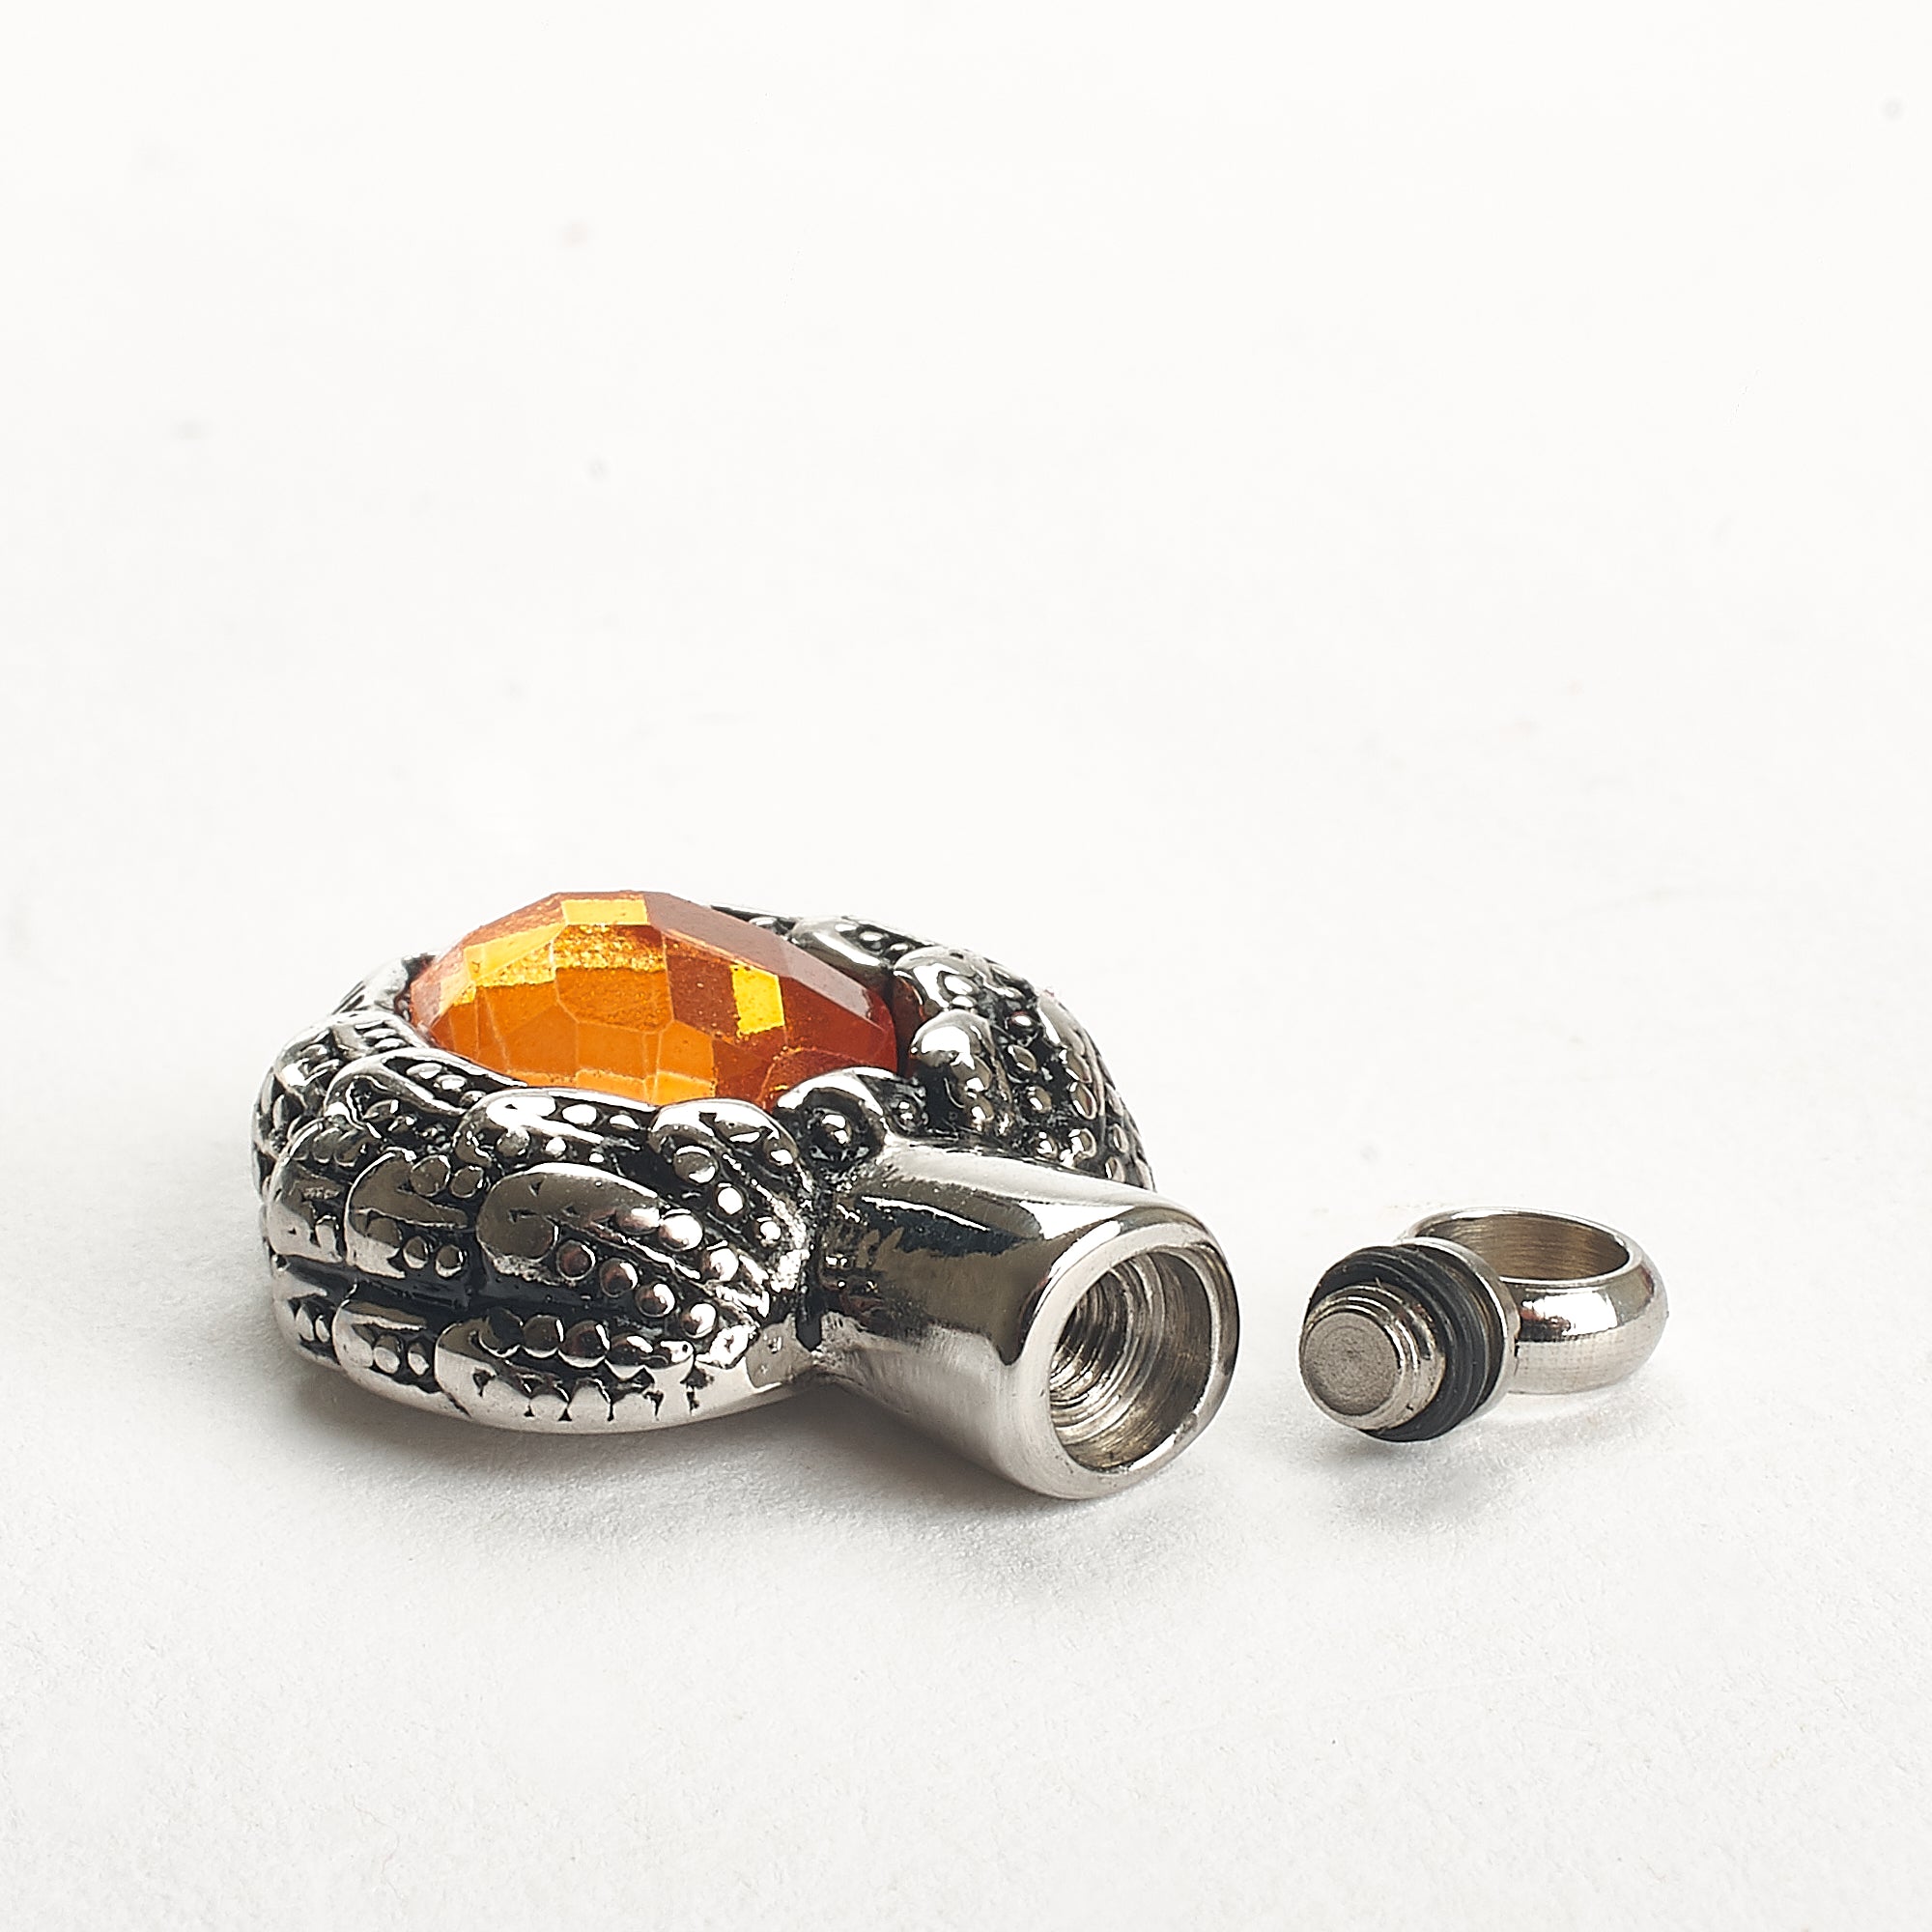 Cremation Pendant - Chariot Angel Wings - Orange/Silver